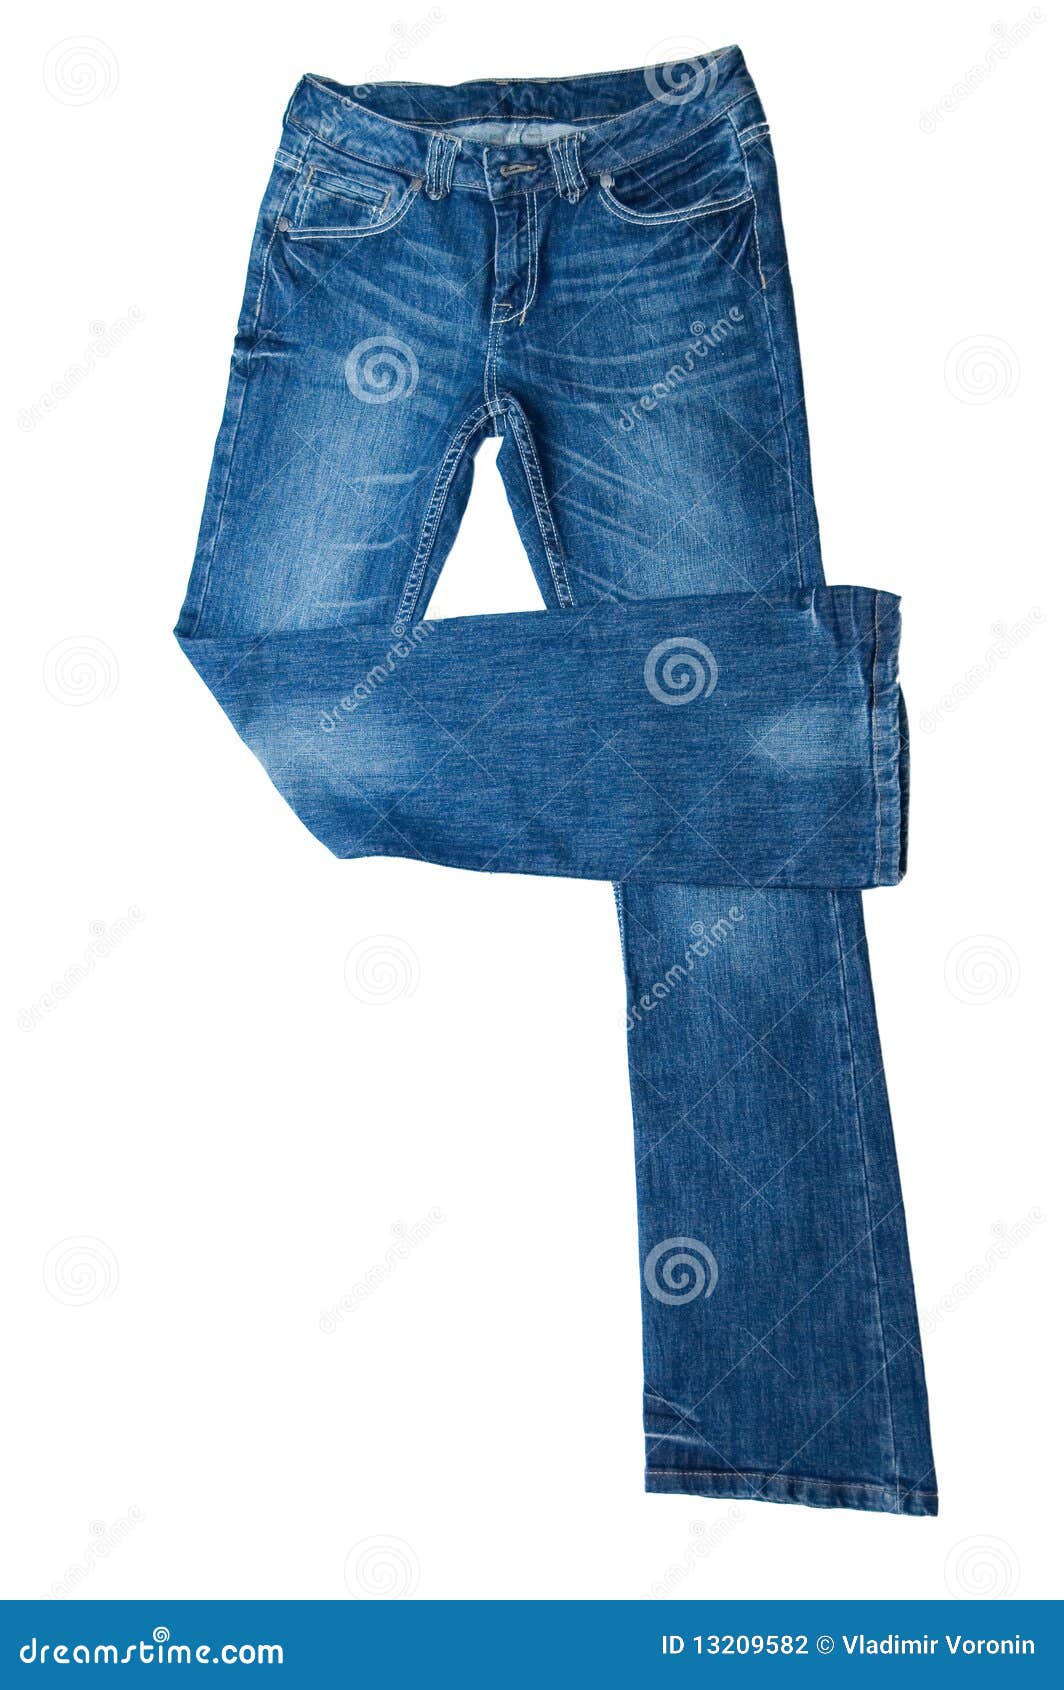 Pair Of Jeans Stock Photography - Image: 13209582